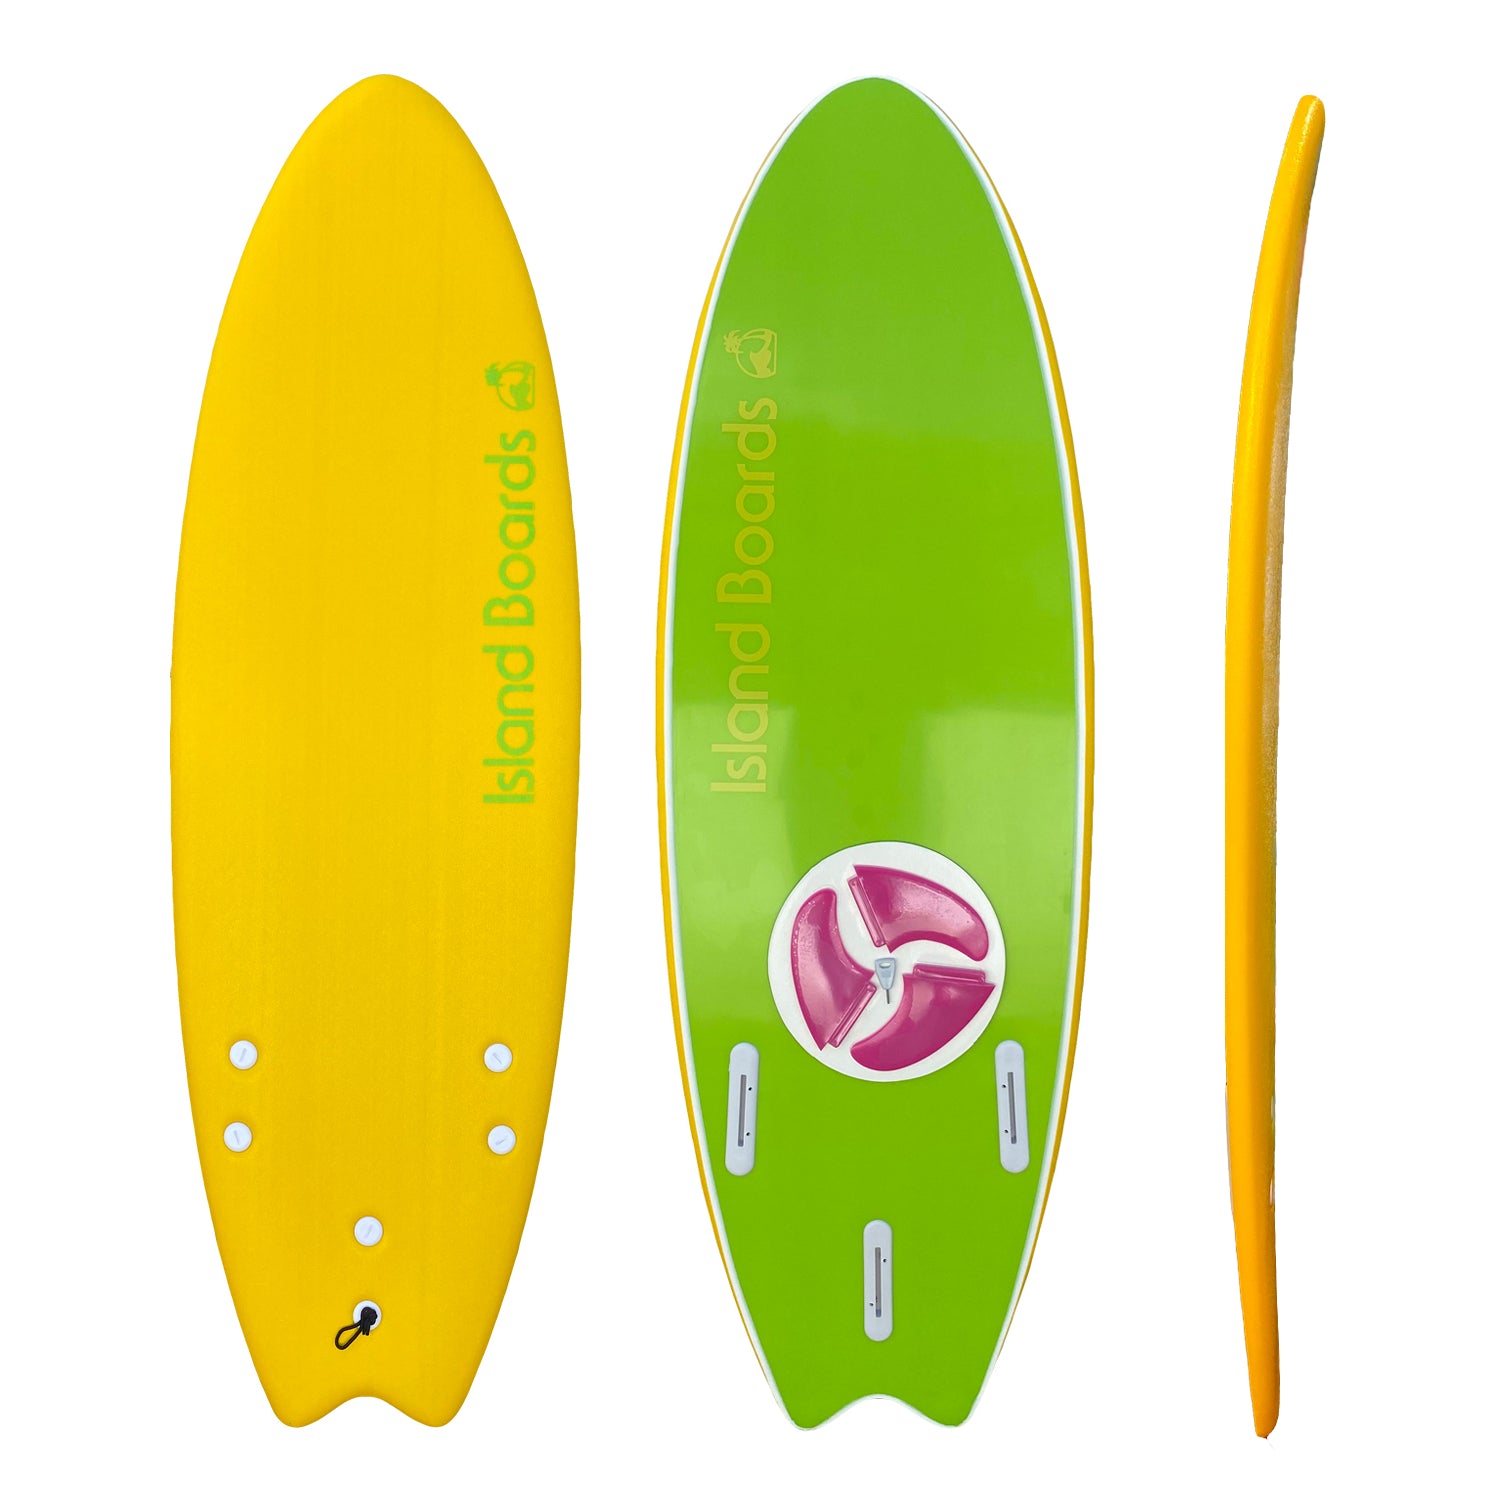 Island Water Sports Swallow Tail Softtop Surfboard Yellow 6ft0in